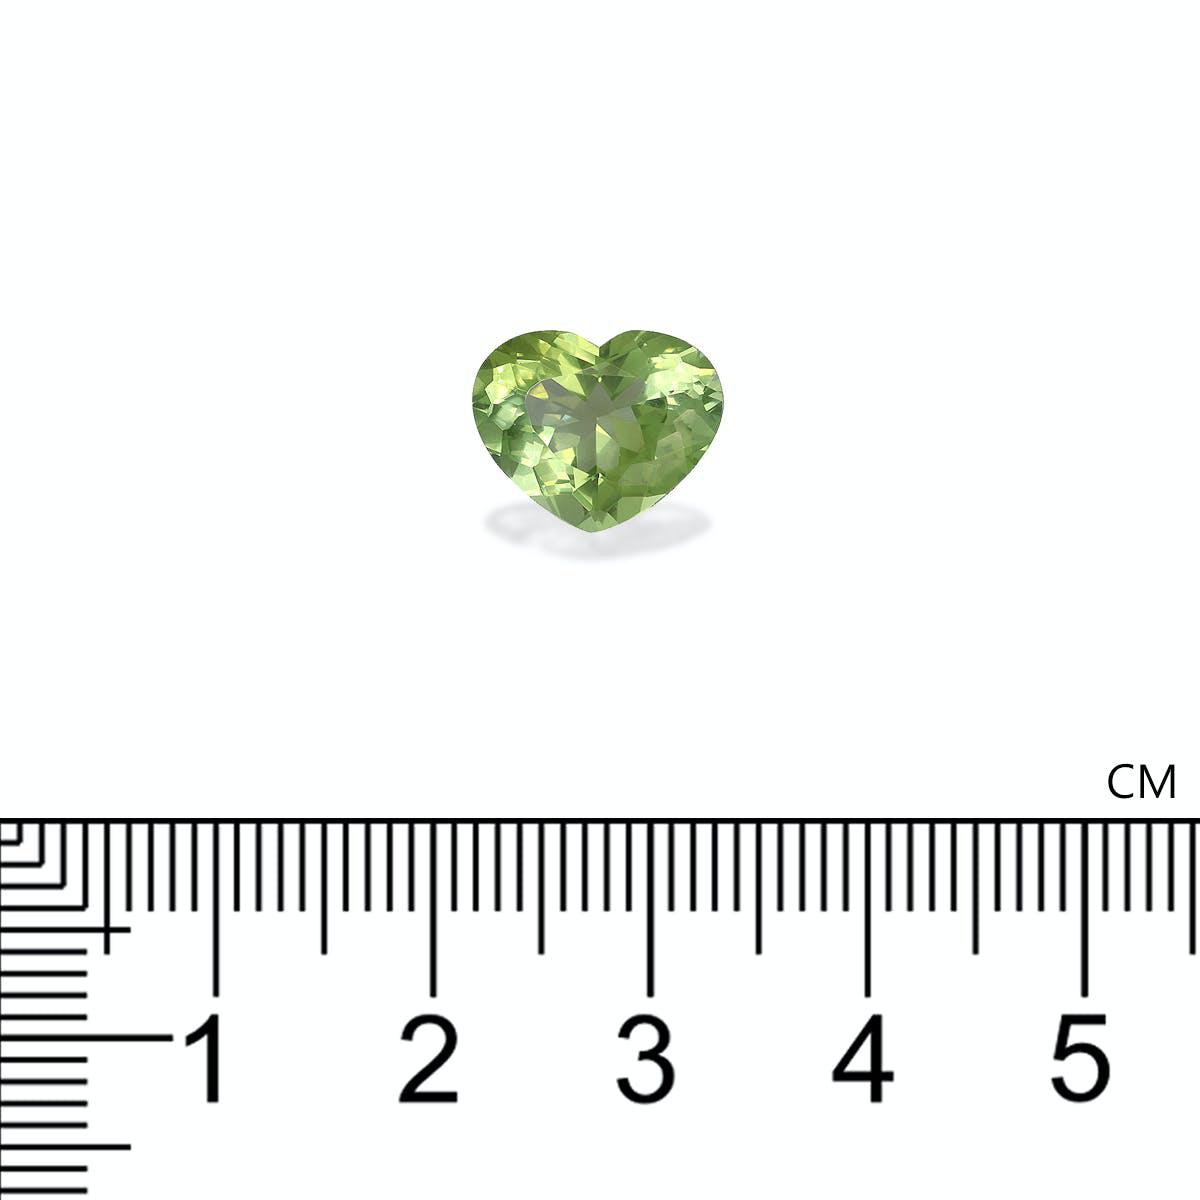 Picture of Pale Green Tourmaline 3.66ct - 11x9mm (TG1527)